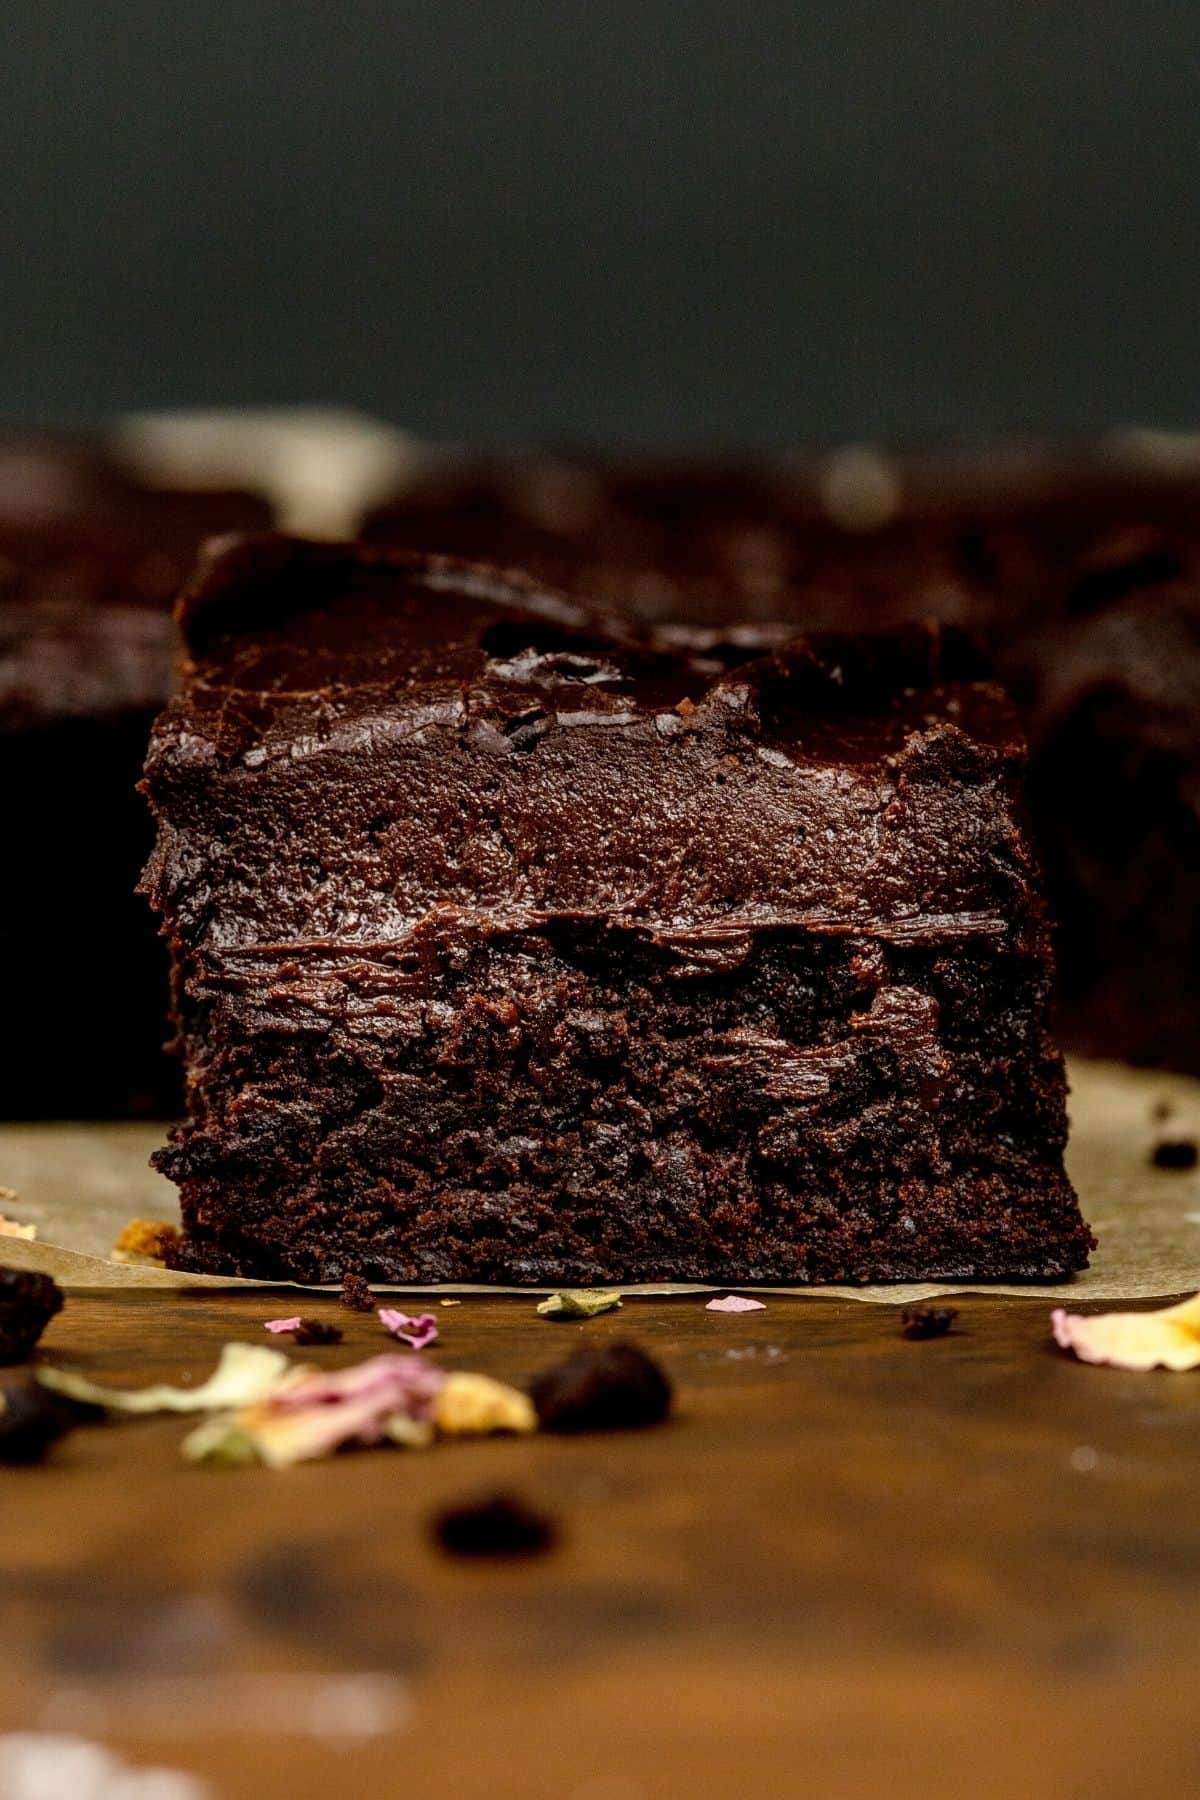 A side view of a single brownie covered in thick chocolate frosting. Rose petals and parchment paper are seen scattered around.